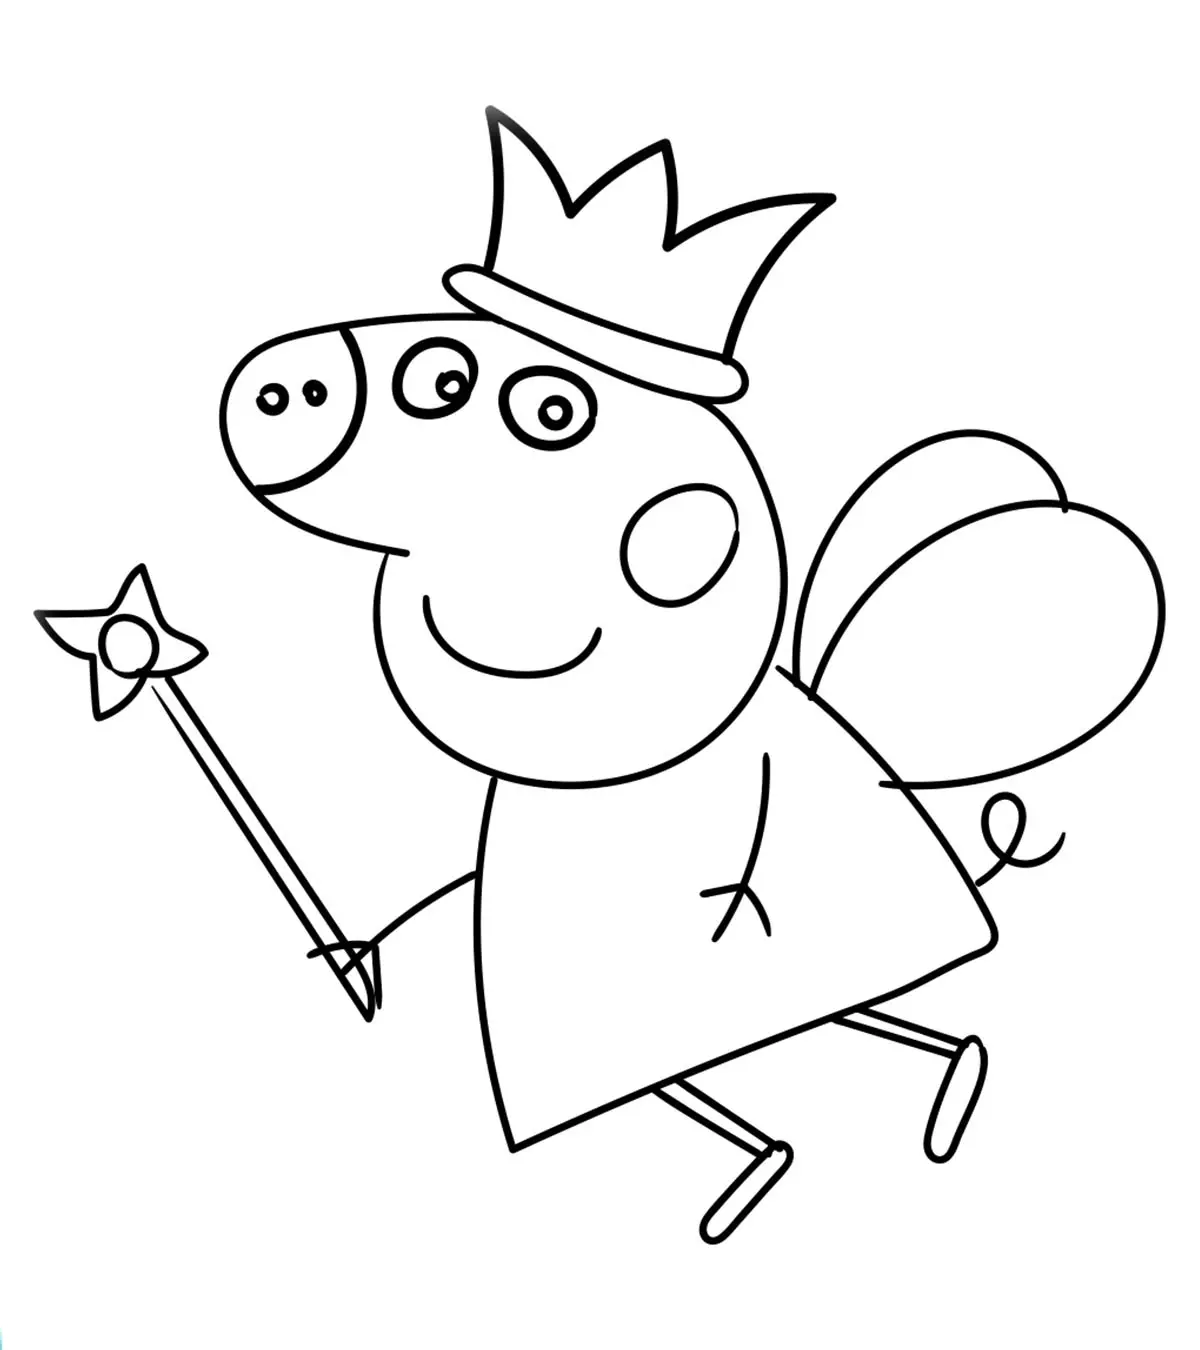 Top 35 Peppa Pig Coloring Pages For Your Little Ones